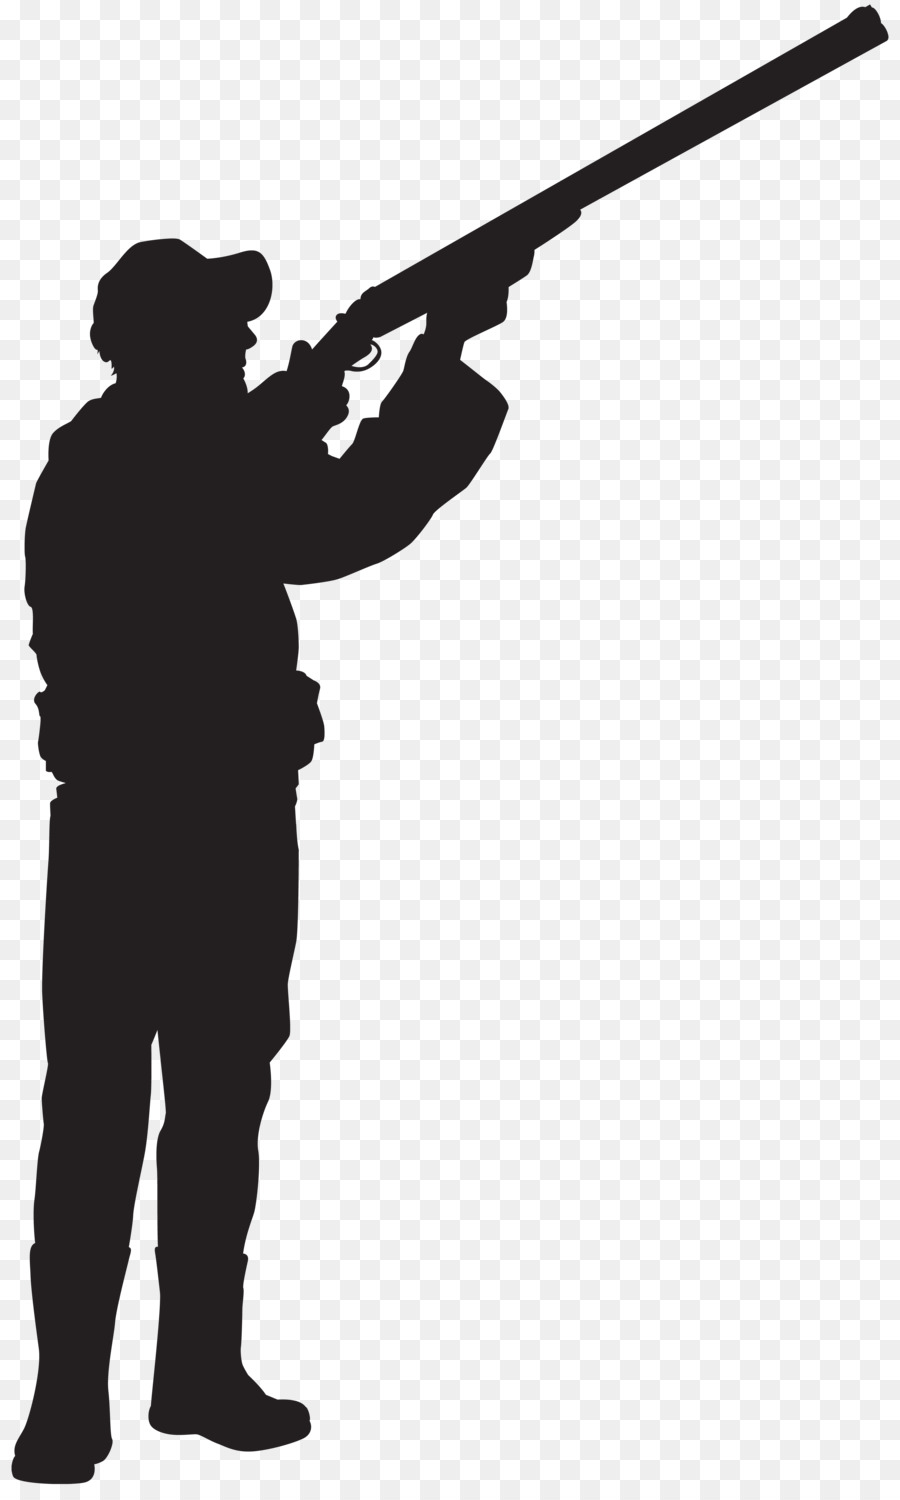 Hunting Silhouette Shooting sport Clip art - silhouete png download - 4842*8000 - Free Transparent Hunting png Download.